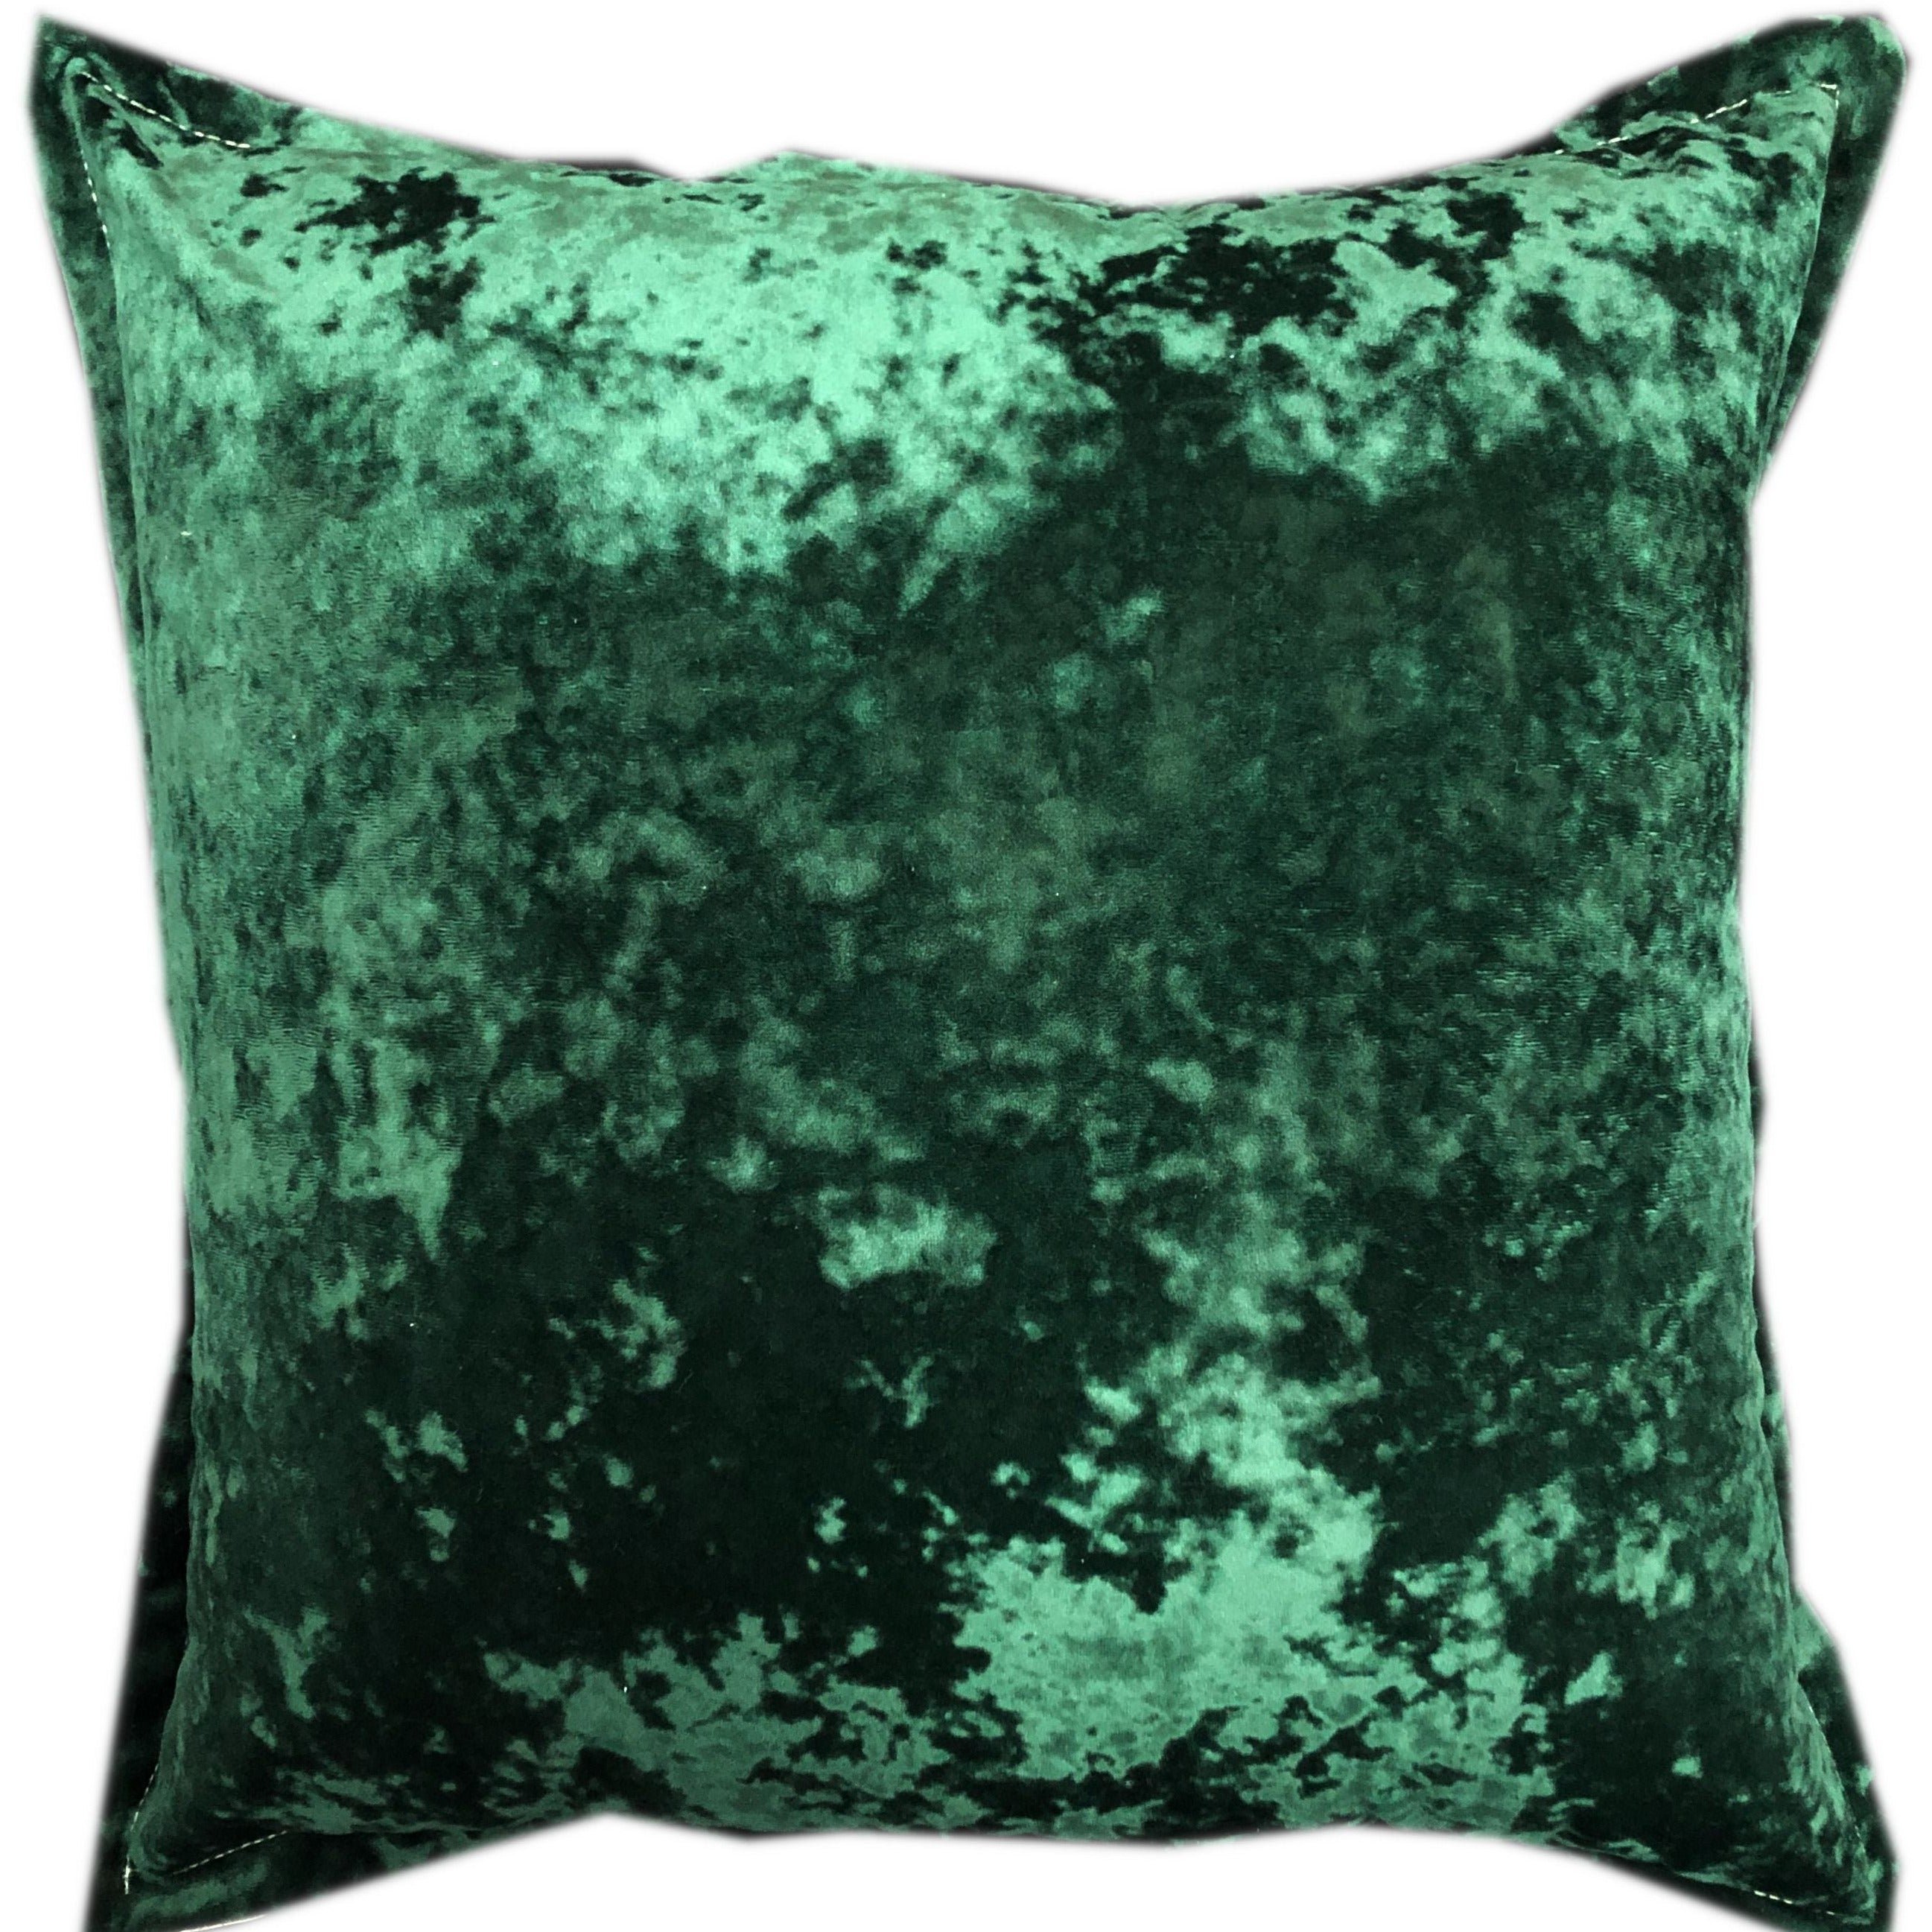 Crushed Emerald Cushion - MHF Decor-Delights